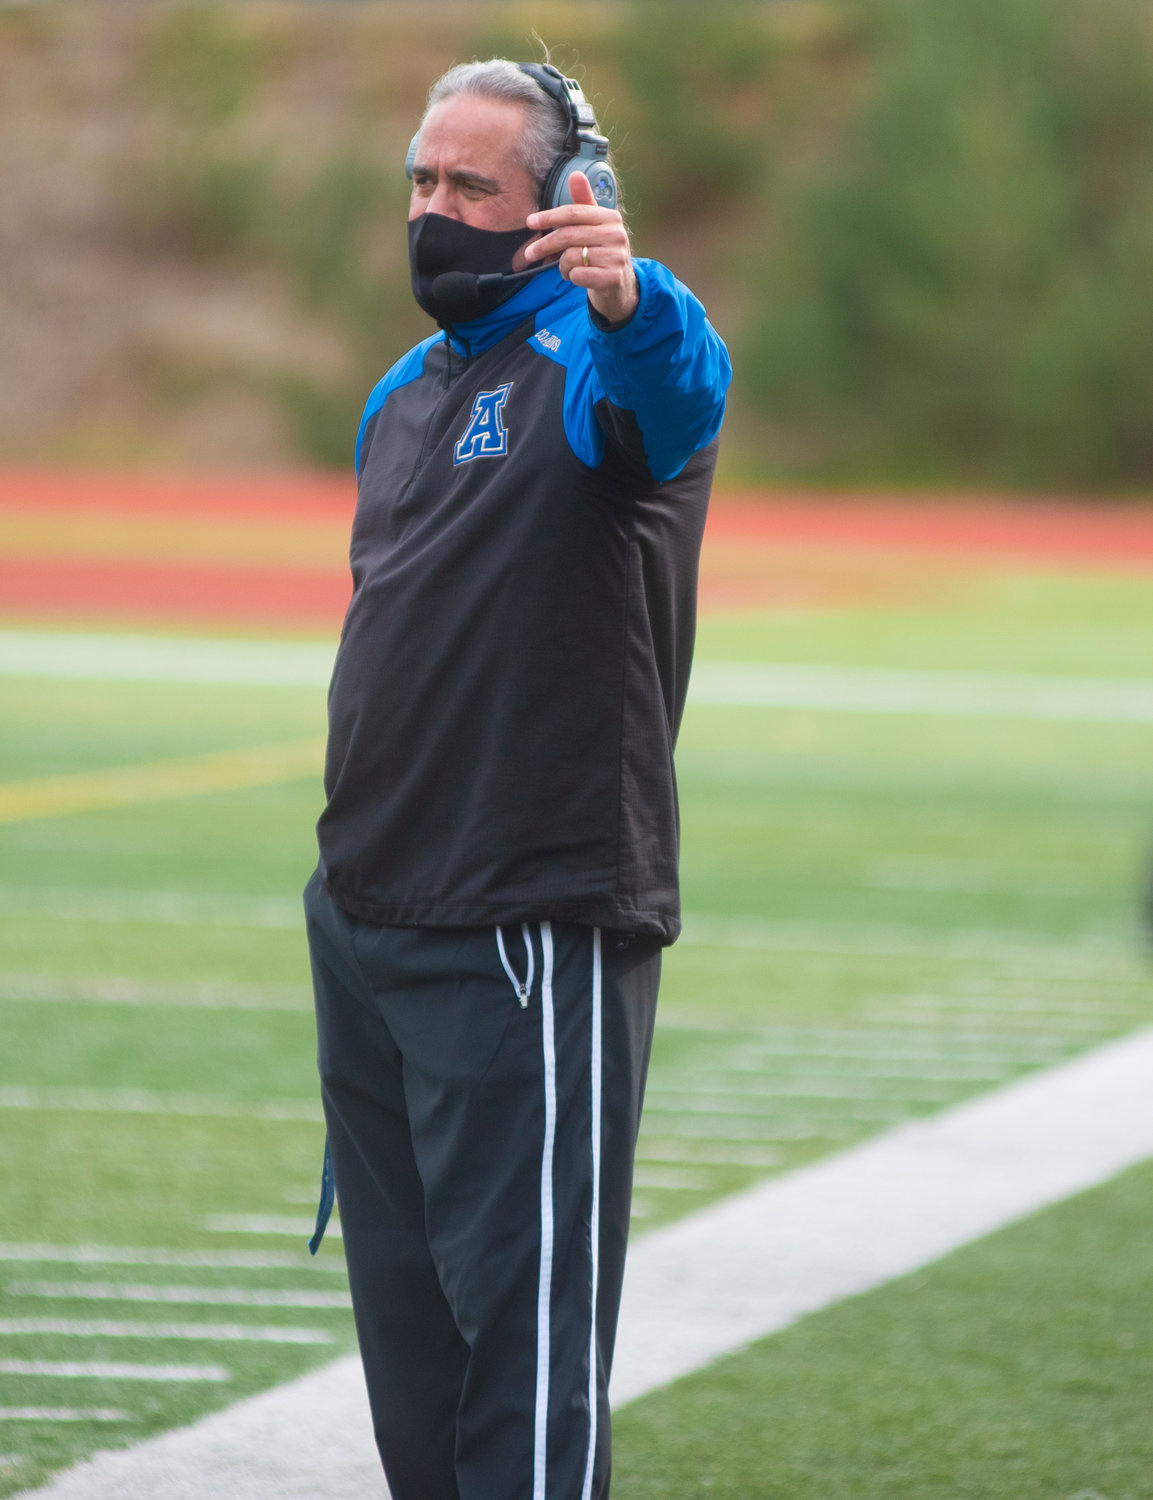 Adna coach K.C. Johnson instructs his team during the Pirates' game against Kalama on Saturday.